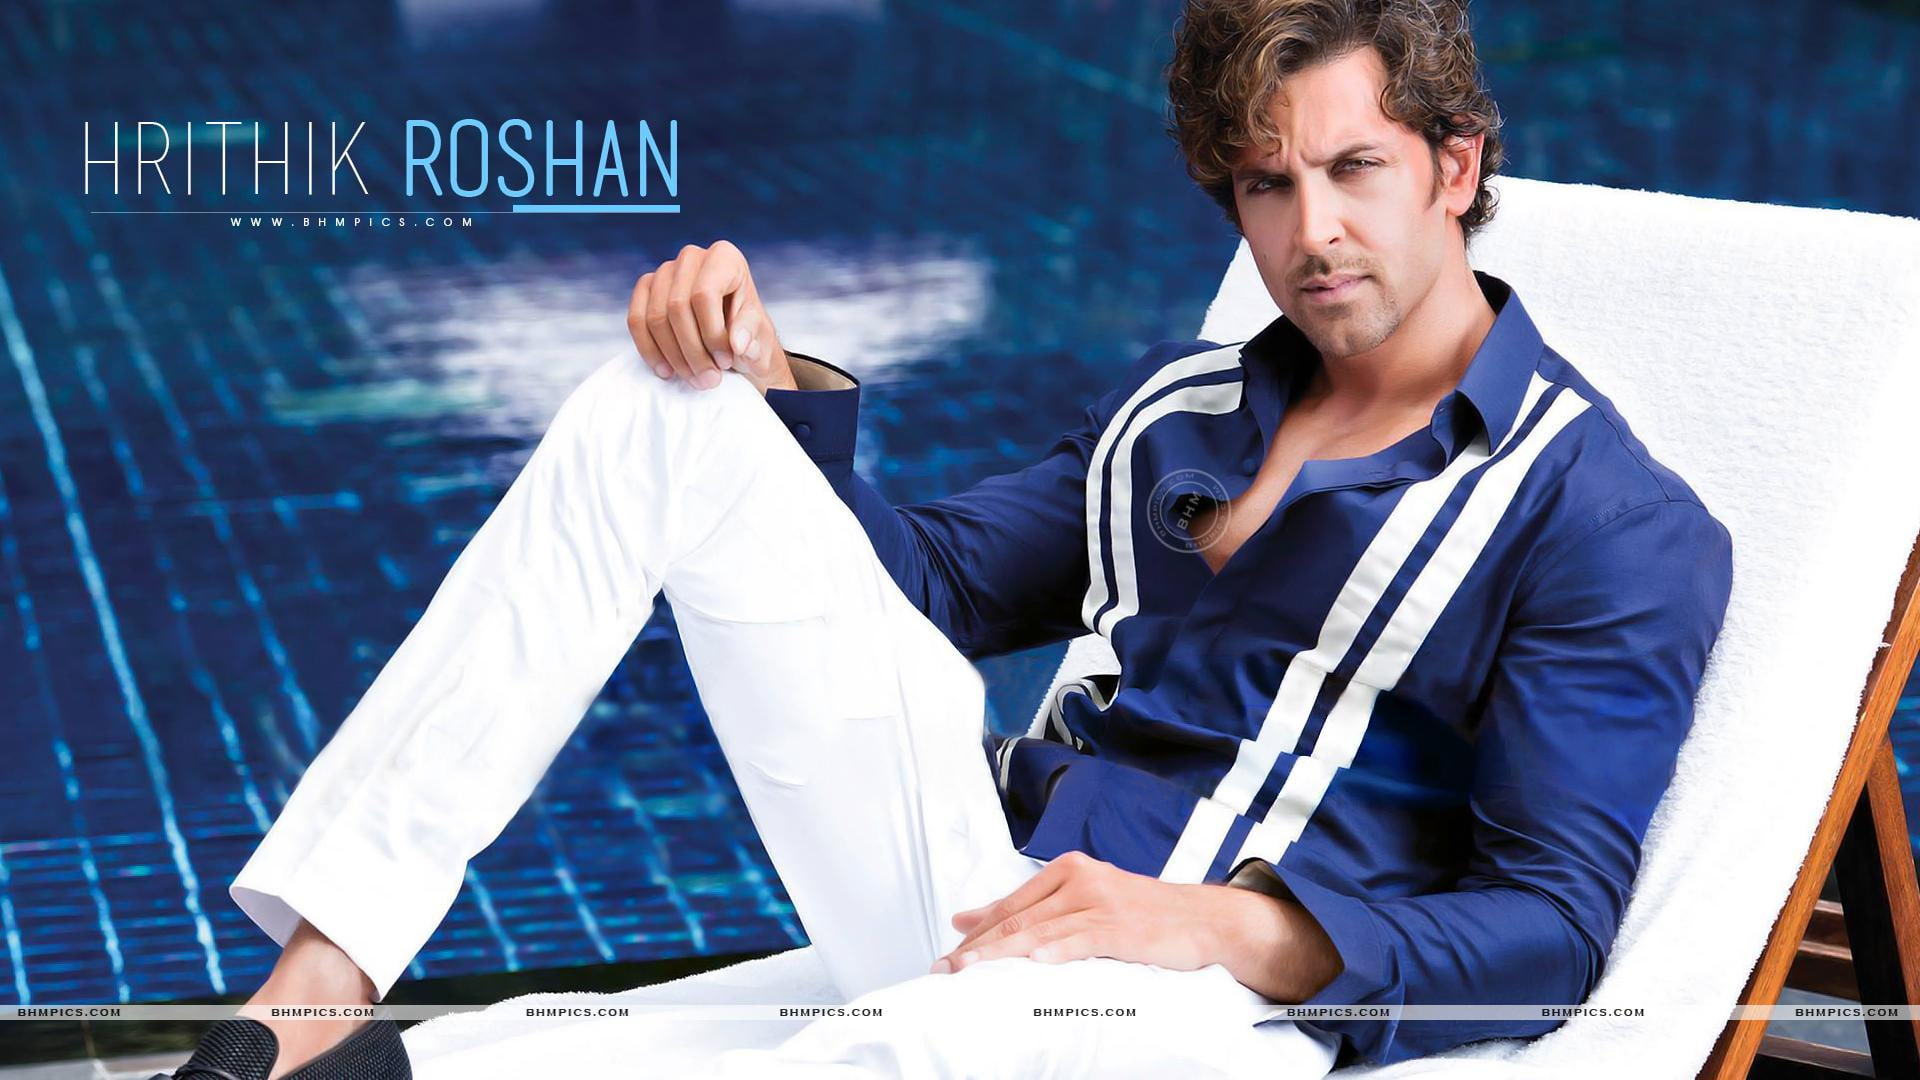 Hrithik Roshan In Blue Shirt, male celebrities, bollywood, actor